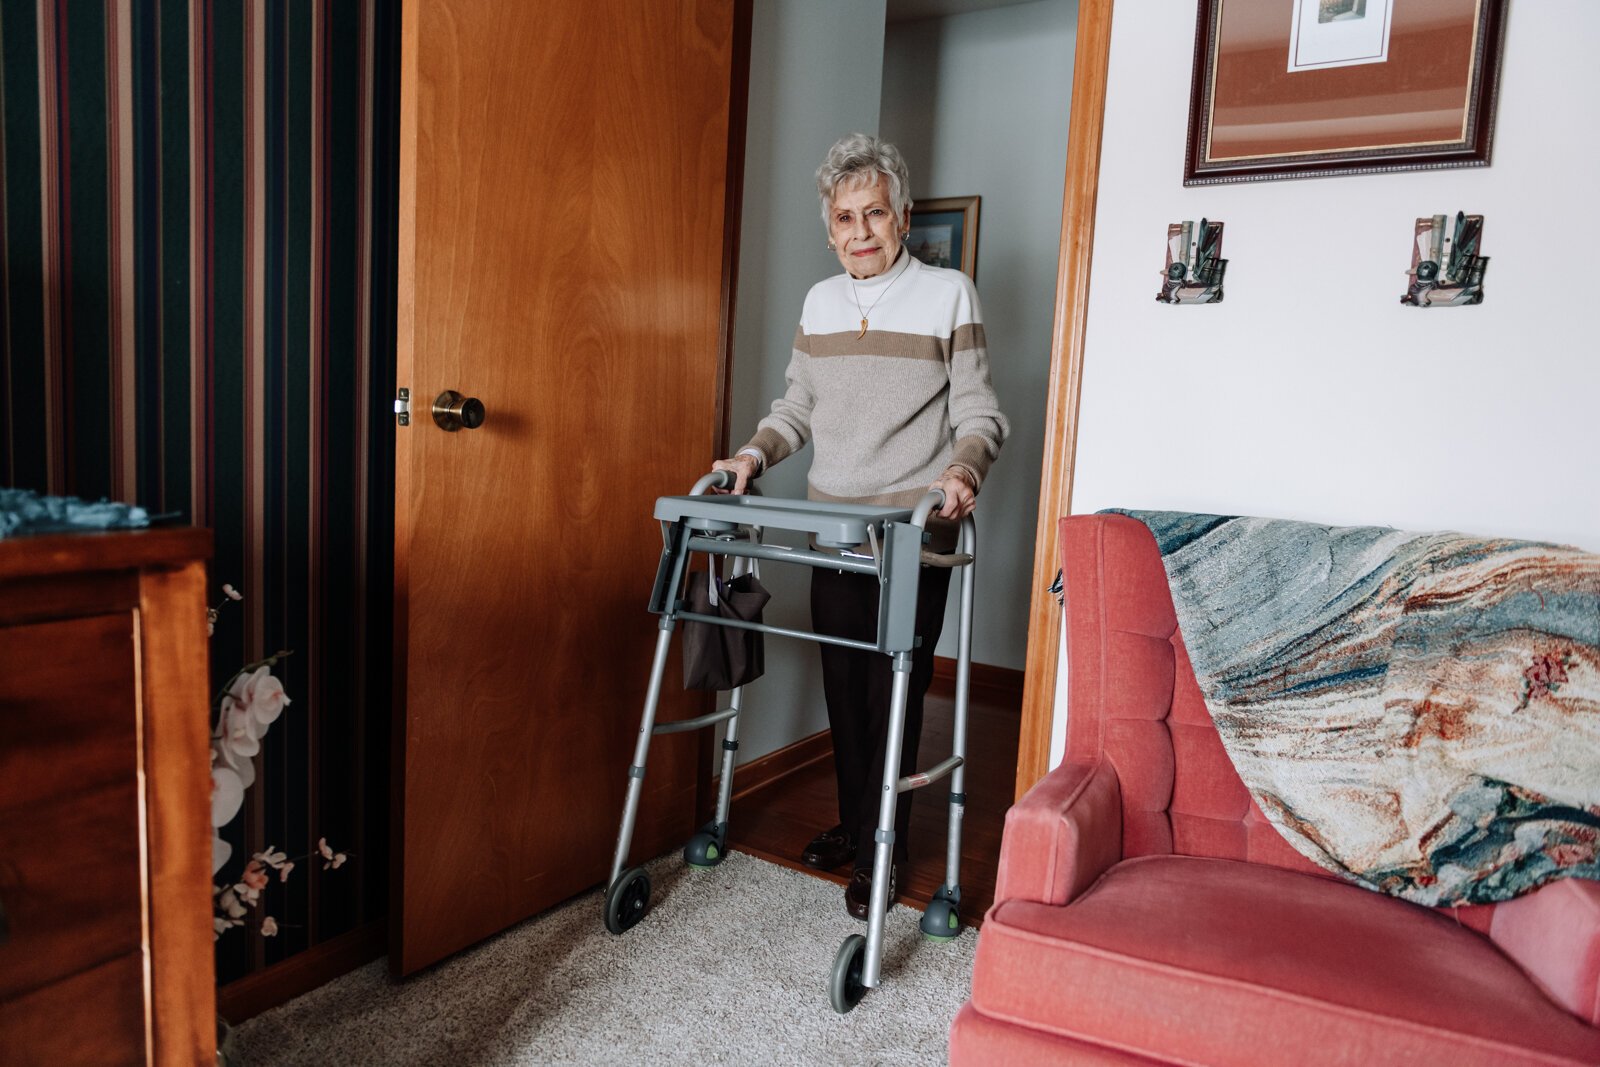 Duchovic's mother-in-law, Kay Miller, can fit through her bedroom doorway using a walker, but the entrance is too small to fit a wheelchair.